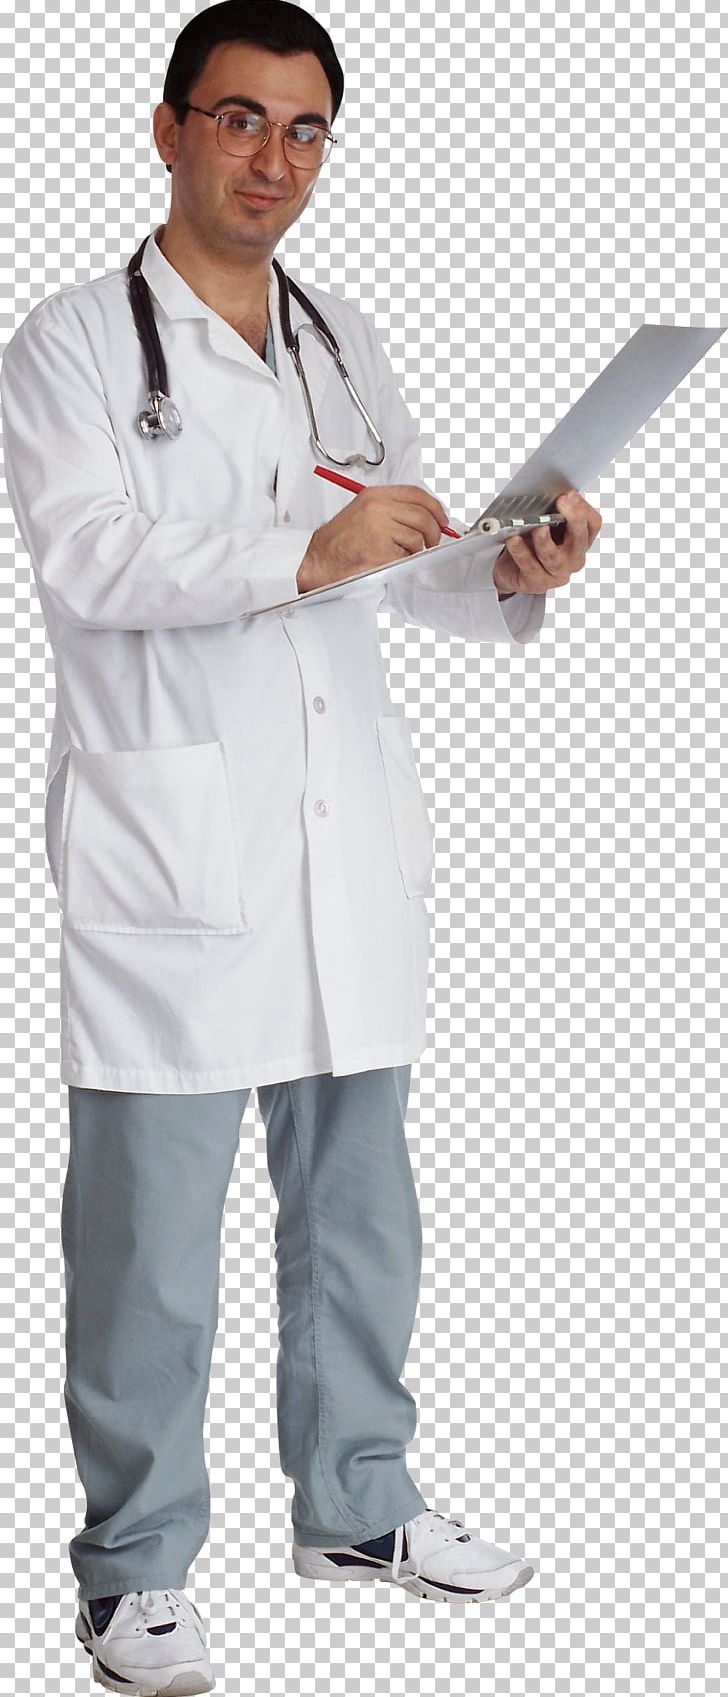 Physician Medicine Rostov State Medical University Disease Health PNG, Clipart, Chefs Uniform, Cook, Costume, Disease, Doctor Free PNG Download